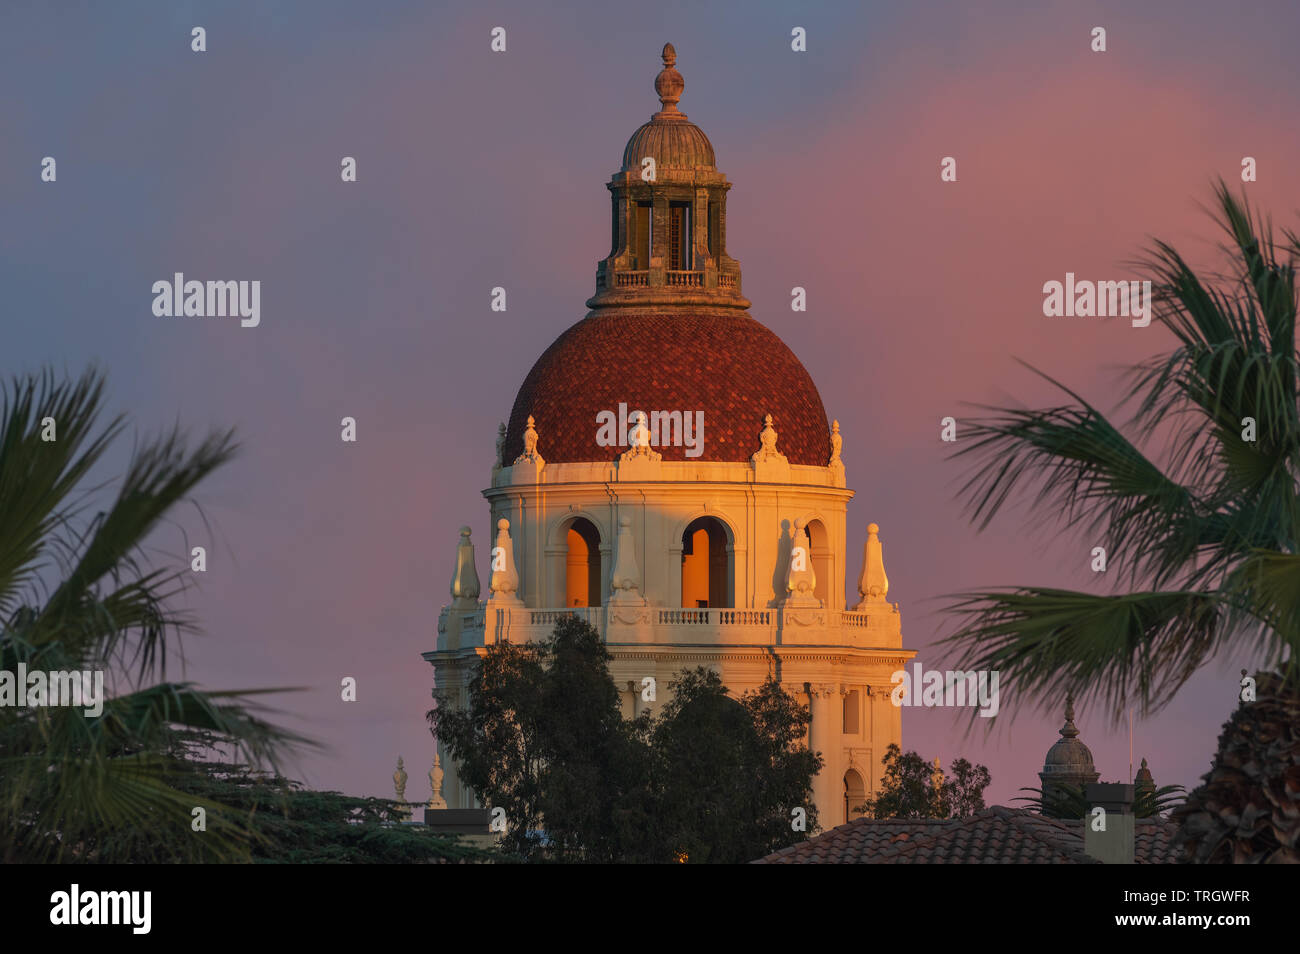 The Pasadena City Hall main tower against beautiful golden light. Pasadena is located in the Los Angeles county in California. Stock Photo